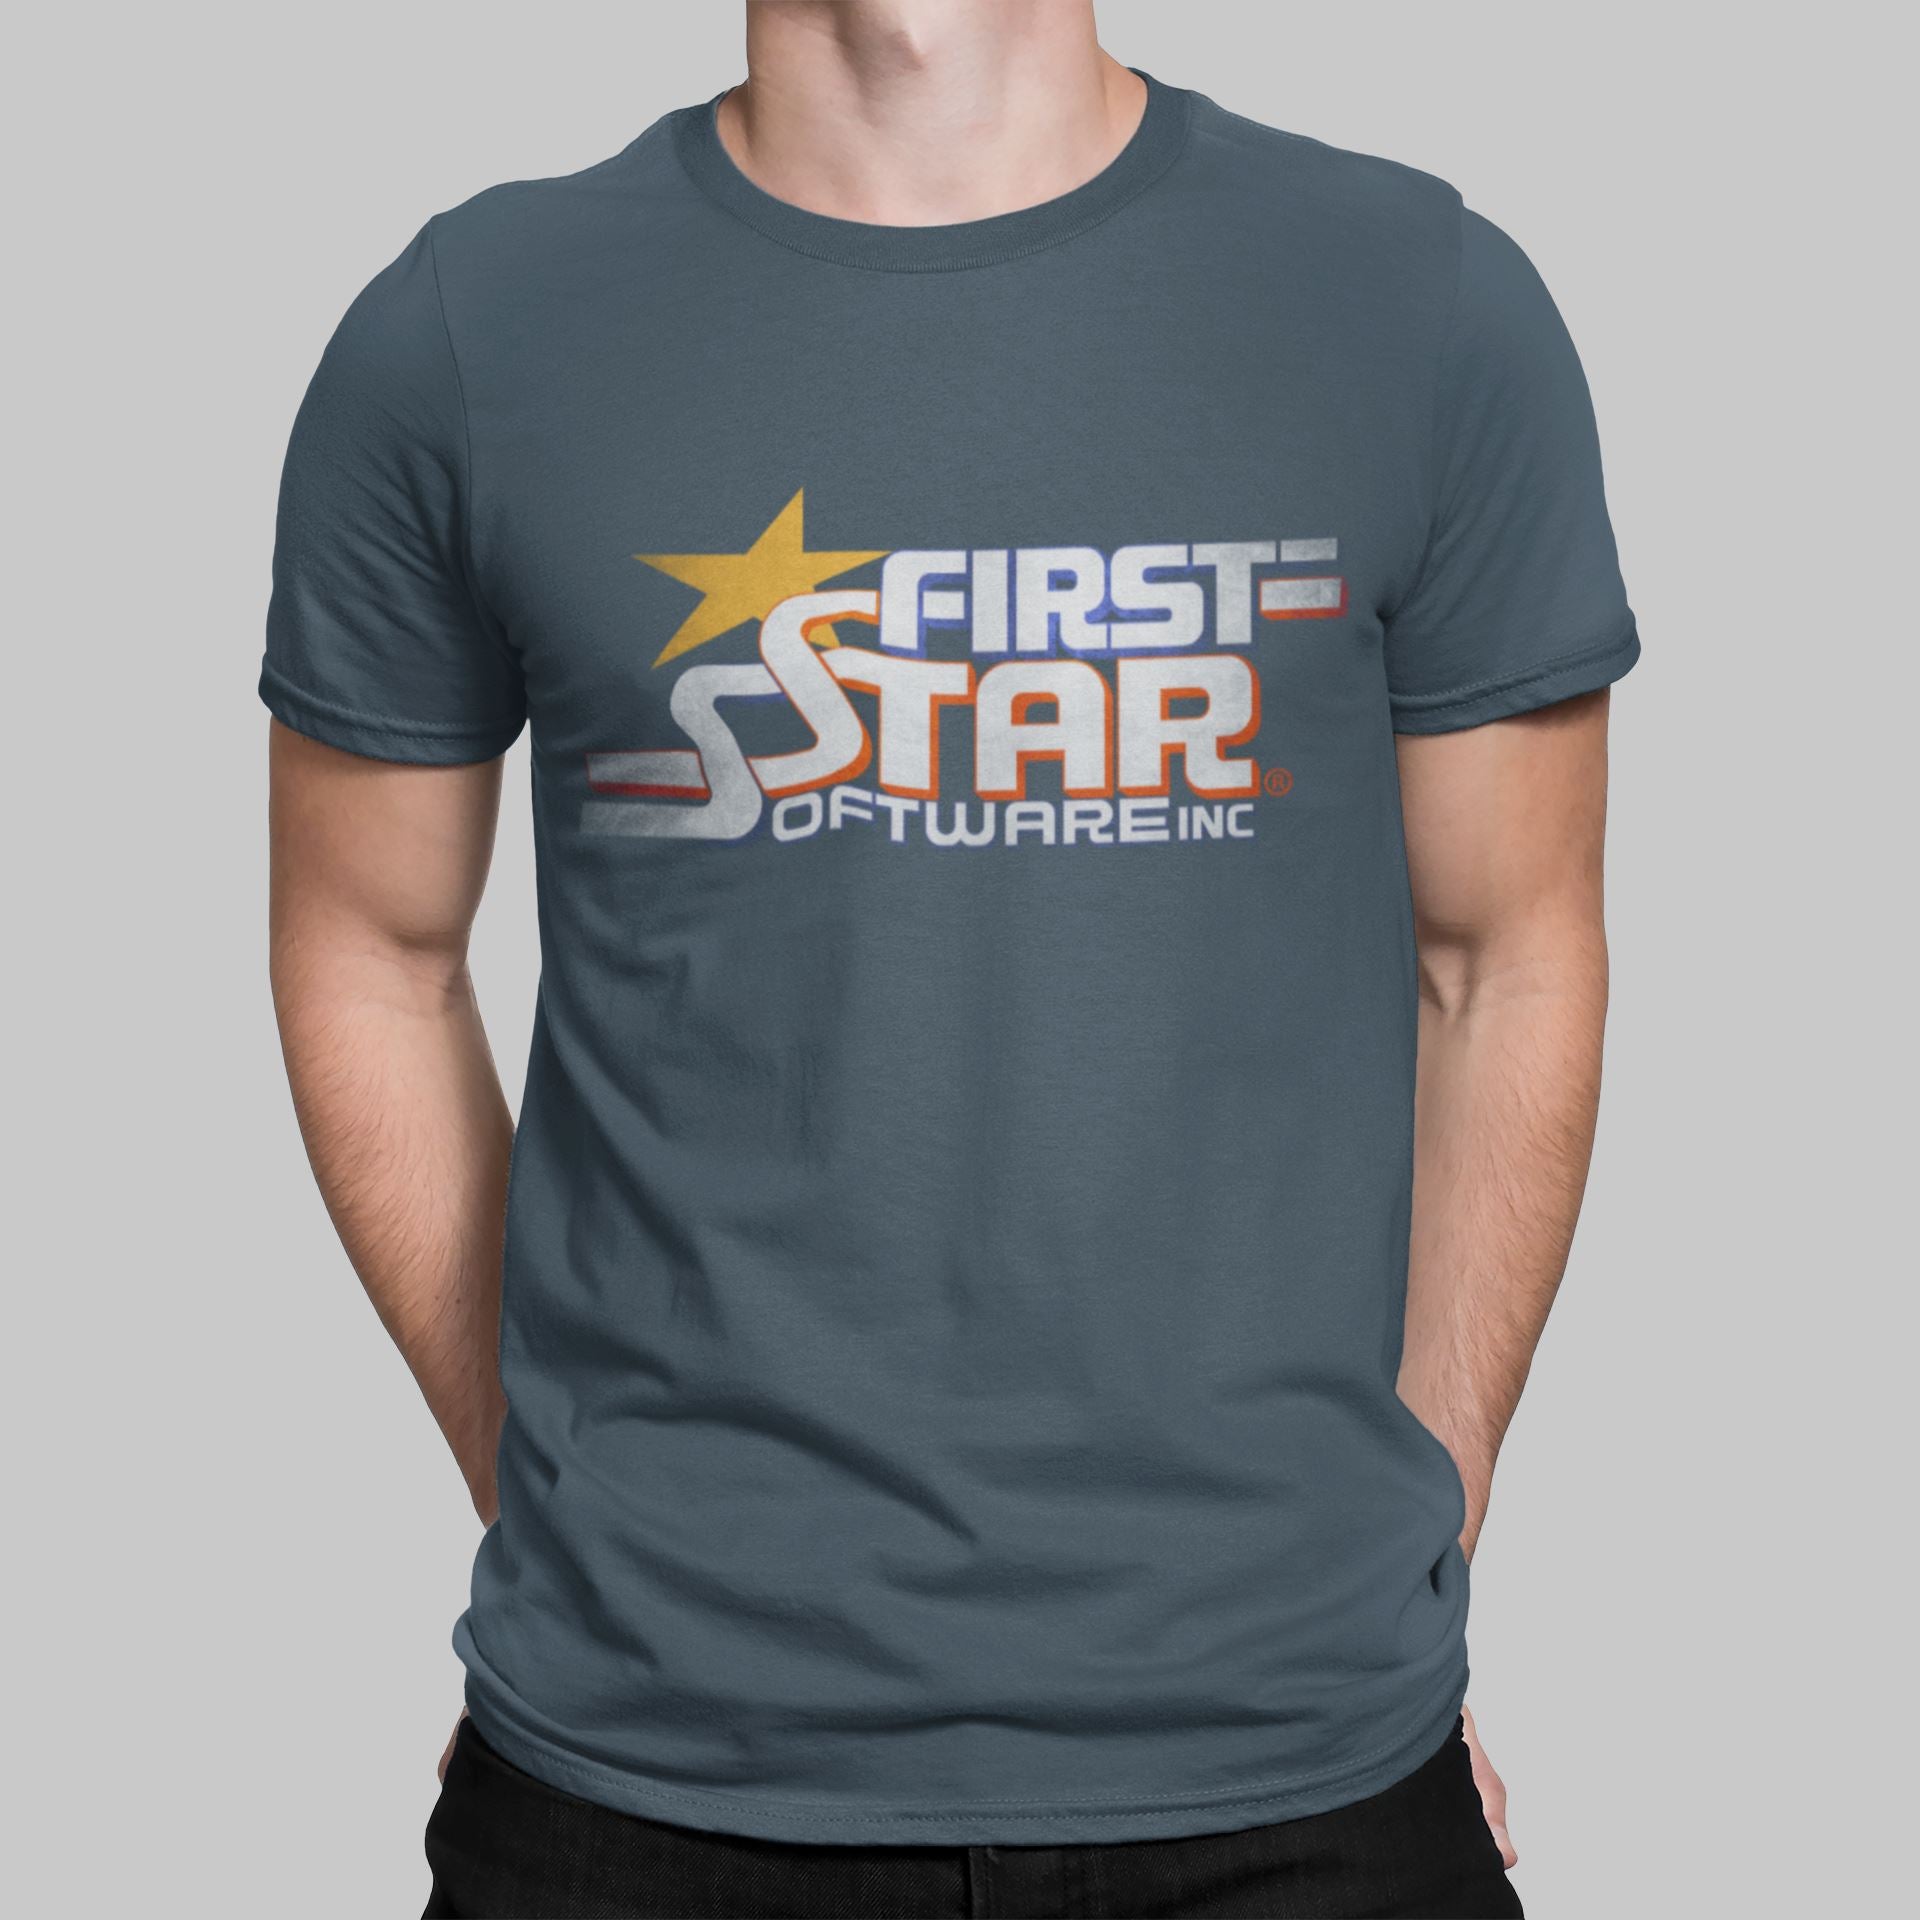 First Star Software Retro Gaming T-Shirt T-Shirt Seven Squared 